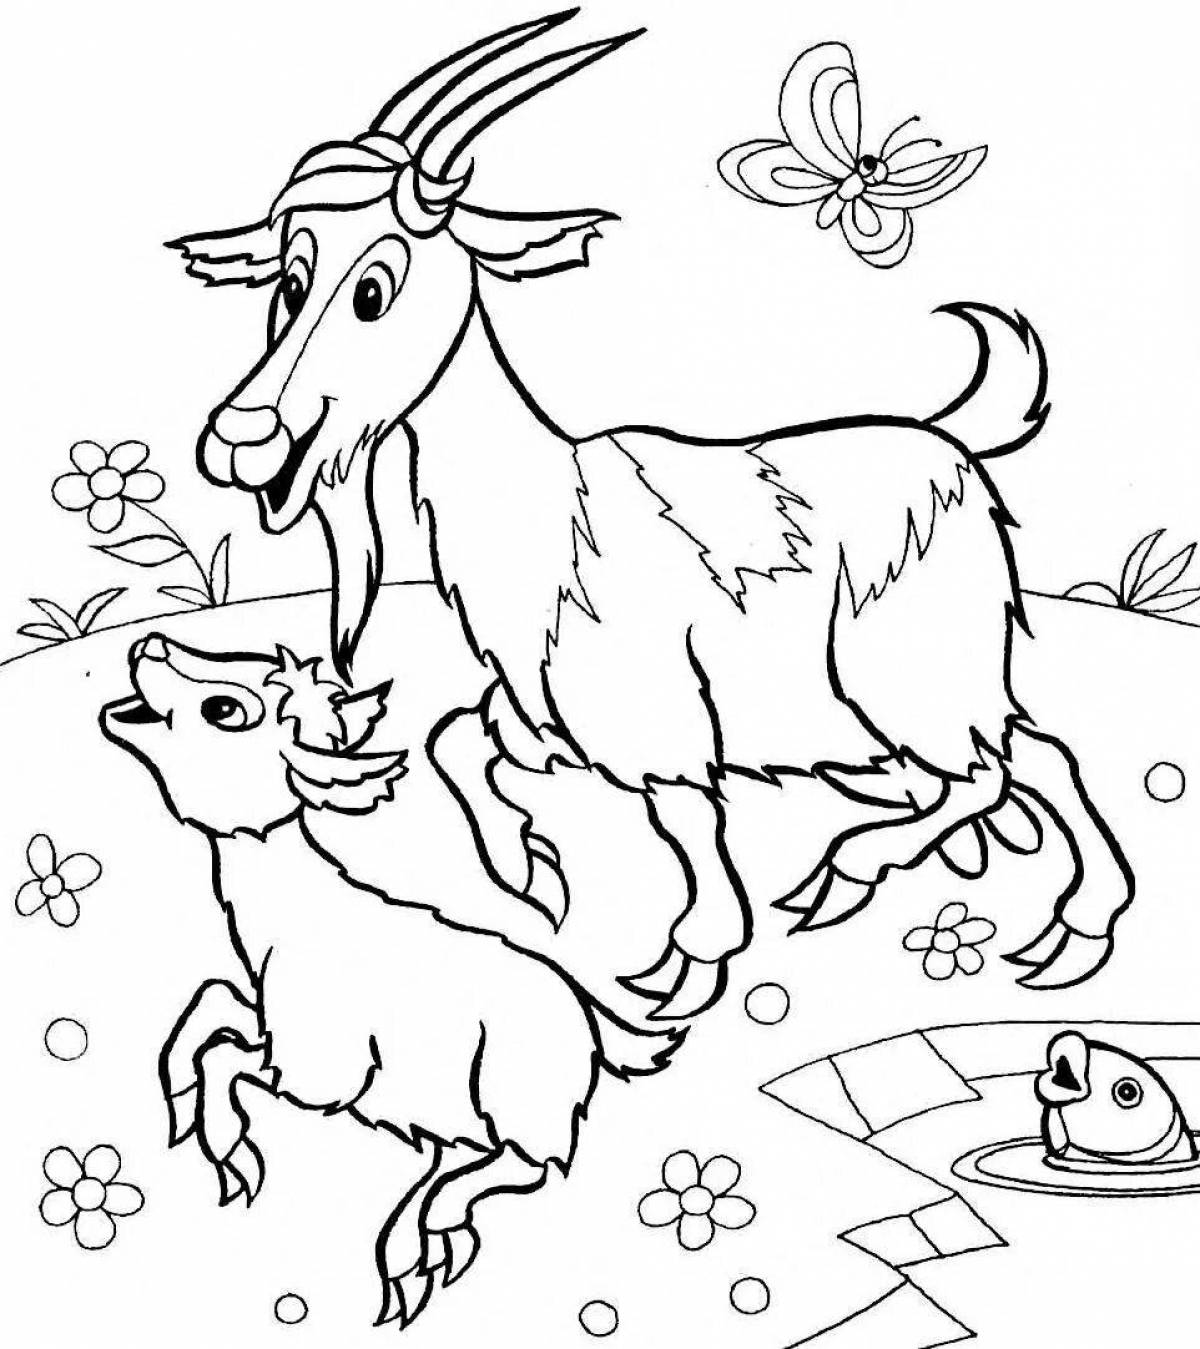 Bright goat coloring book for children 5-6 years old